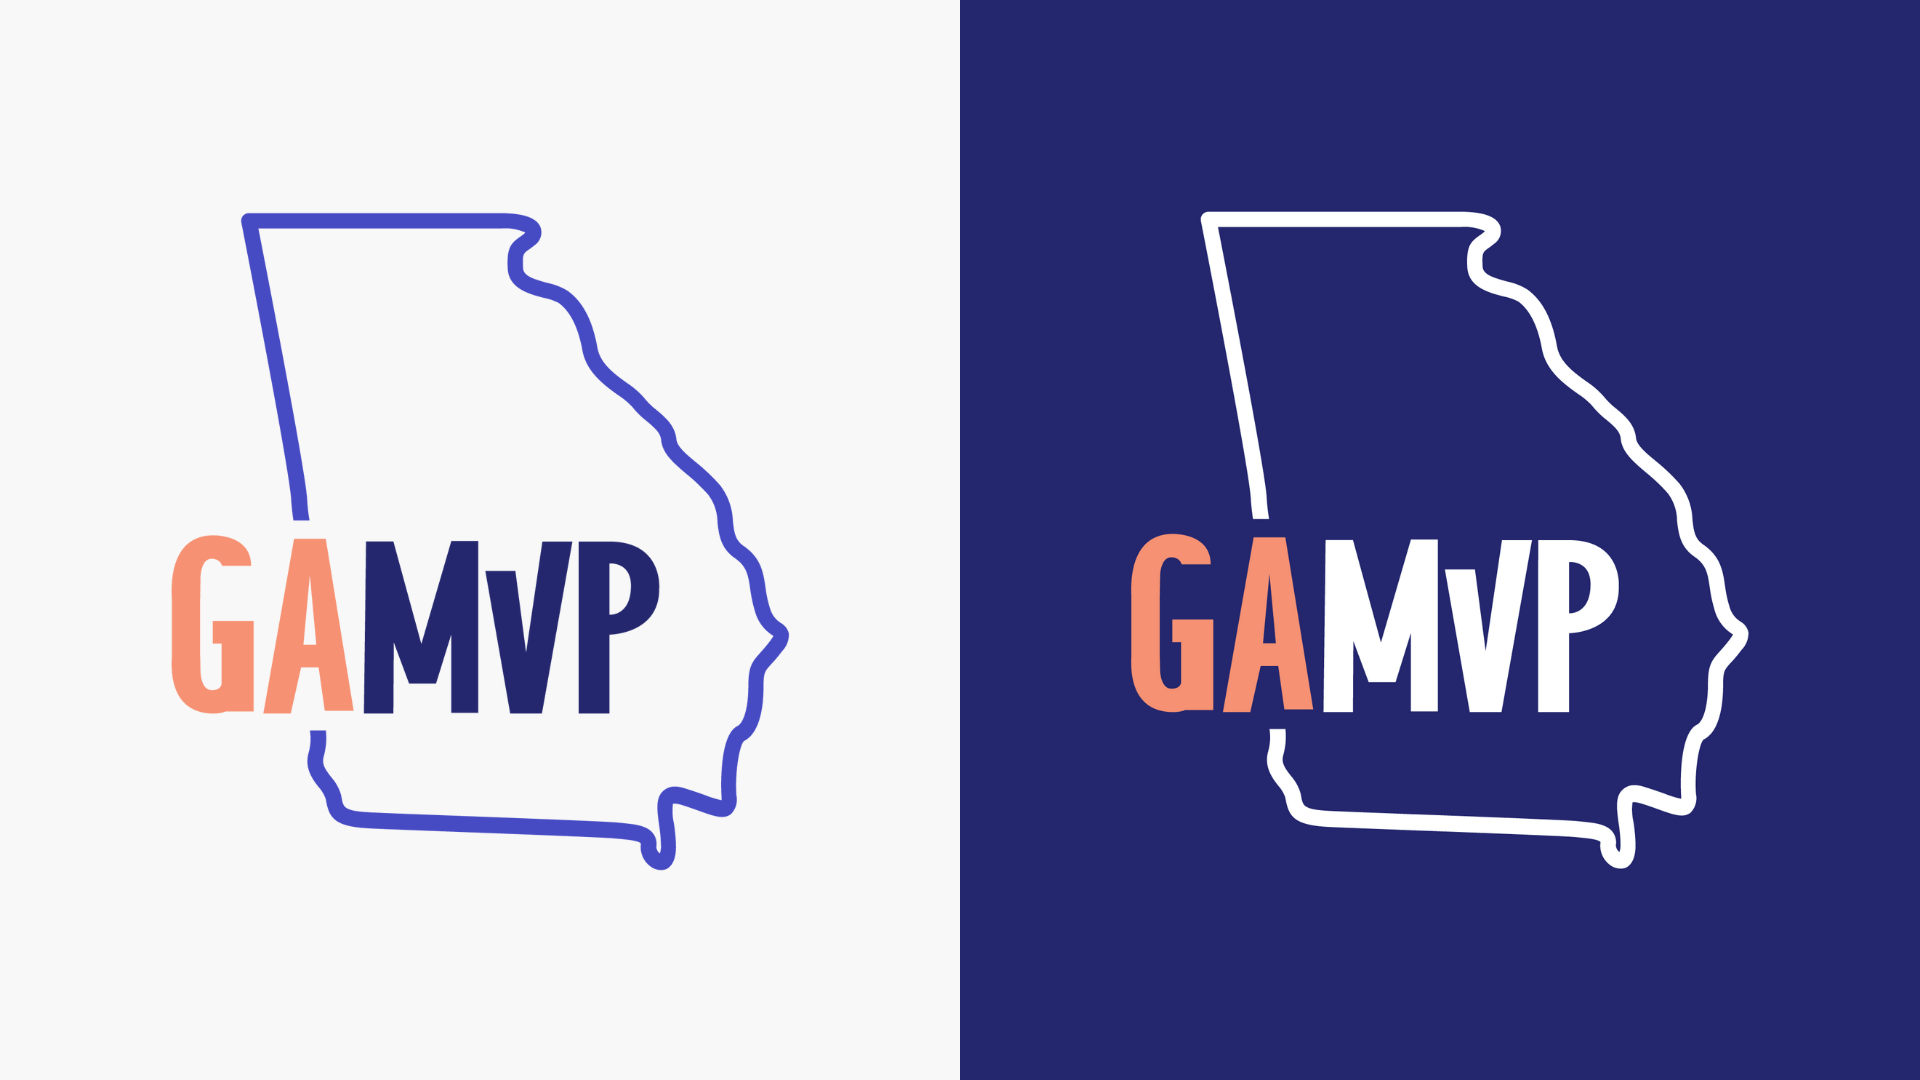 reimagine collective GAMVP Secondary Logo.png